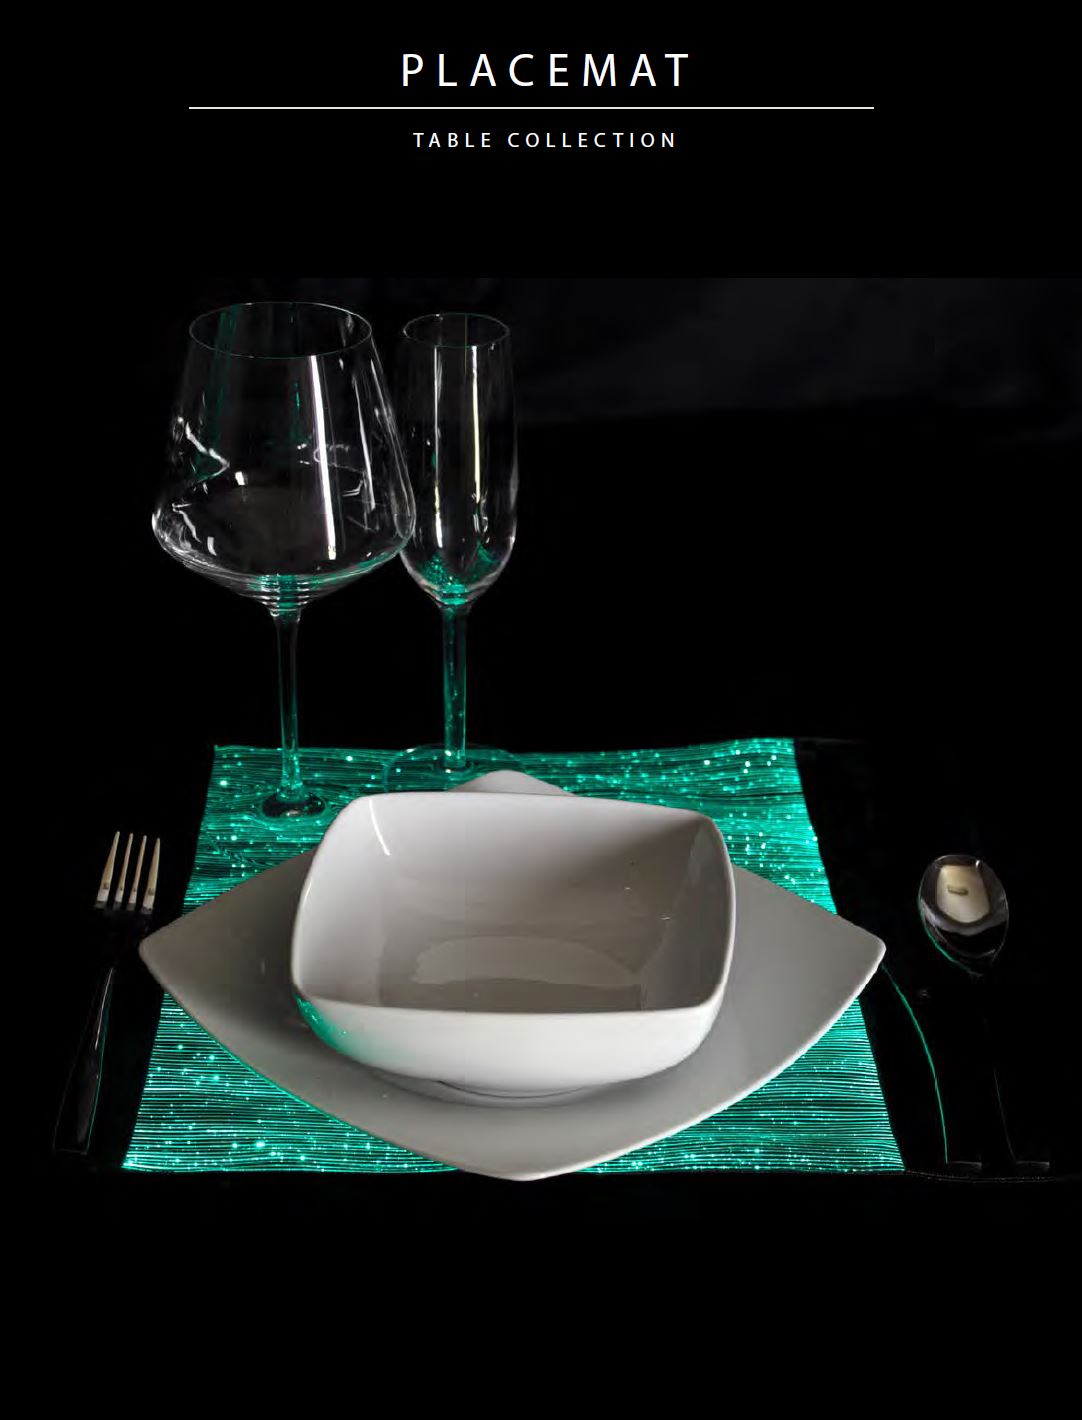 Collection: Placemats